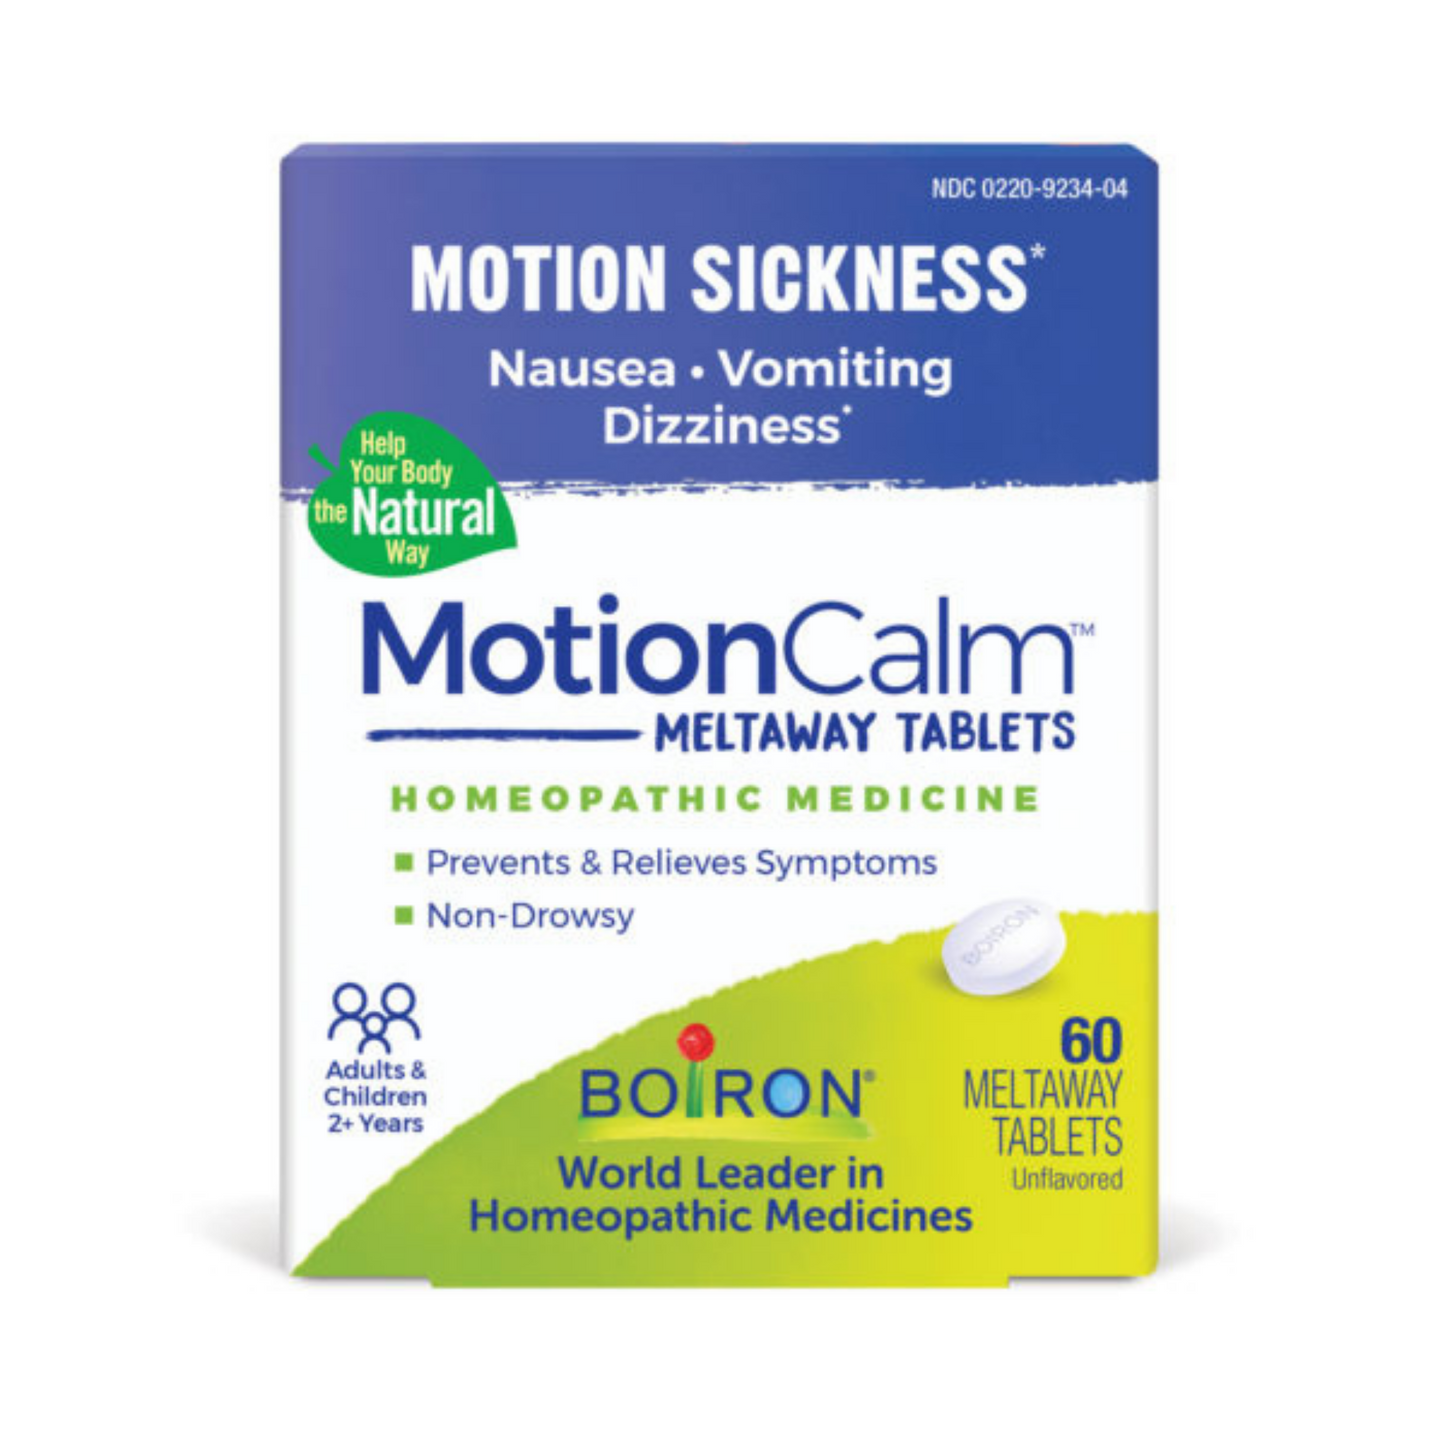 Primary Image of MotionCalm Meltaway Tablets